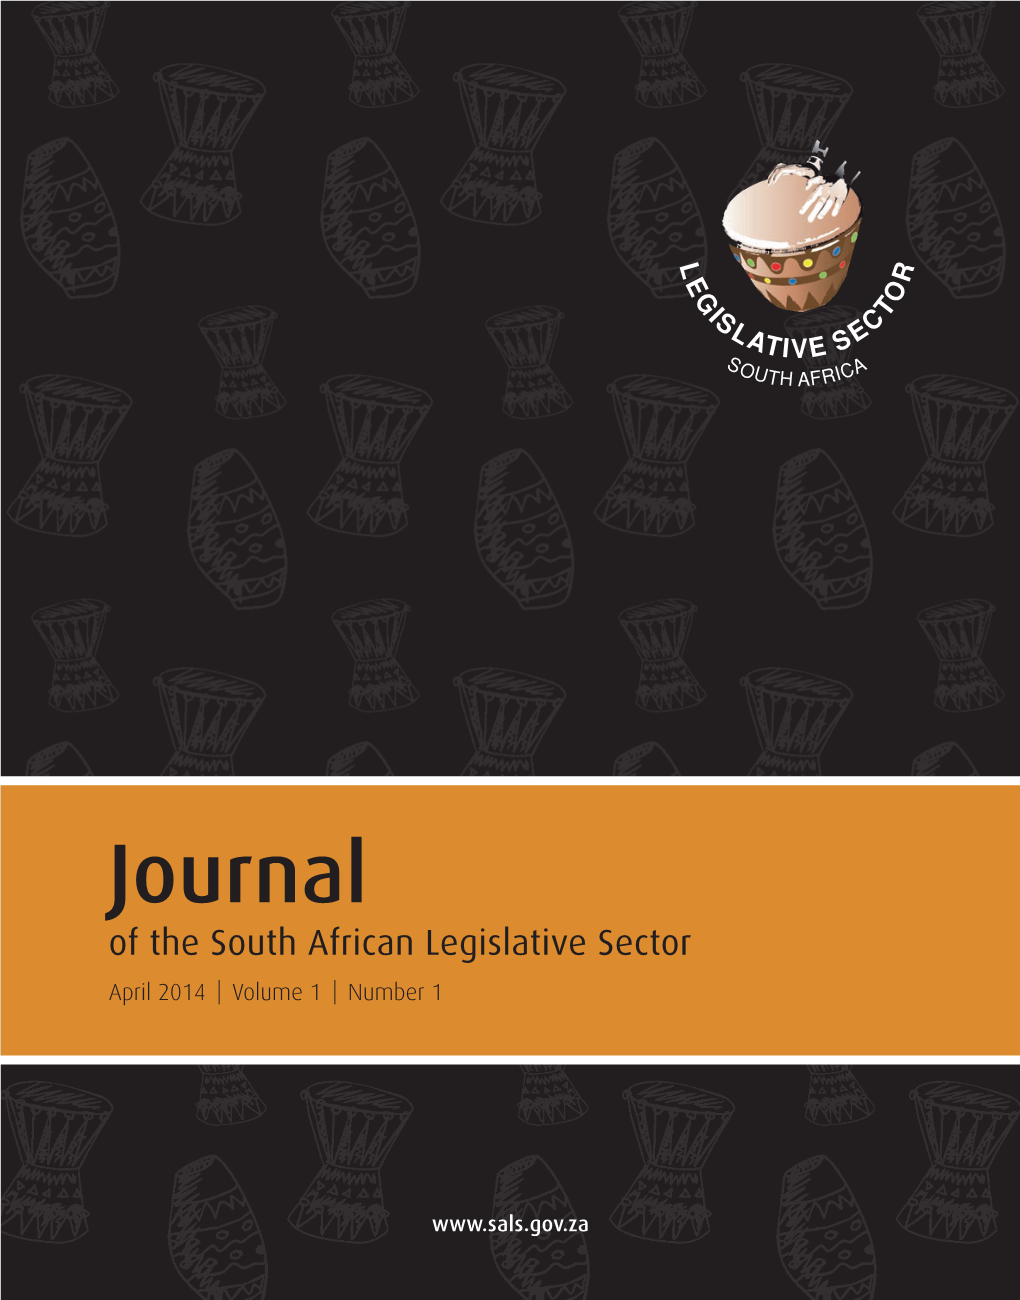 Journal of the South African Legislative Sector April 2014 Volume 1 Number 1